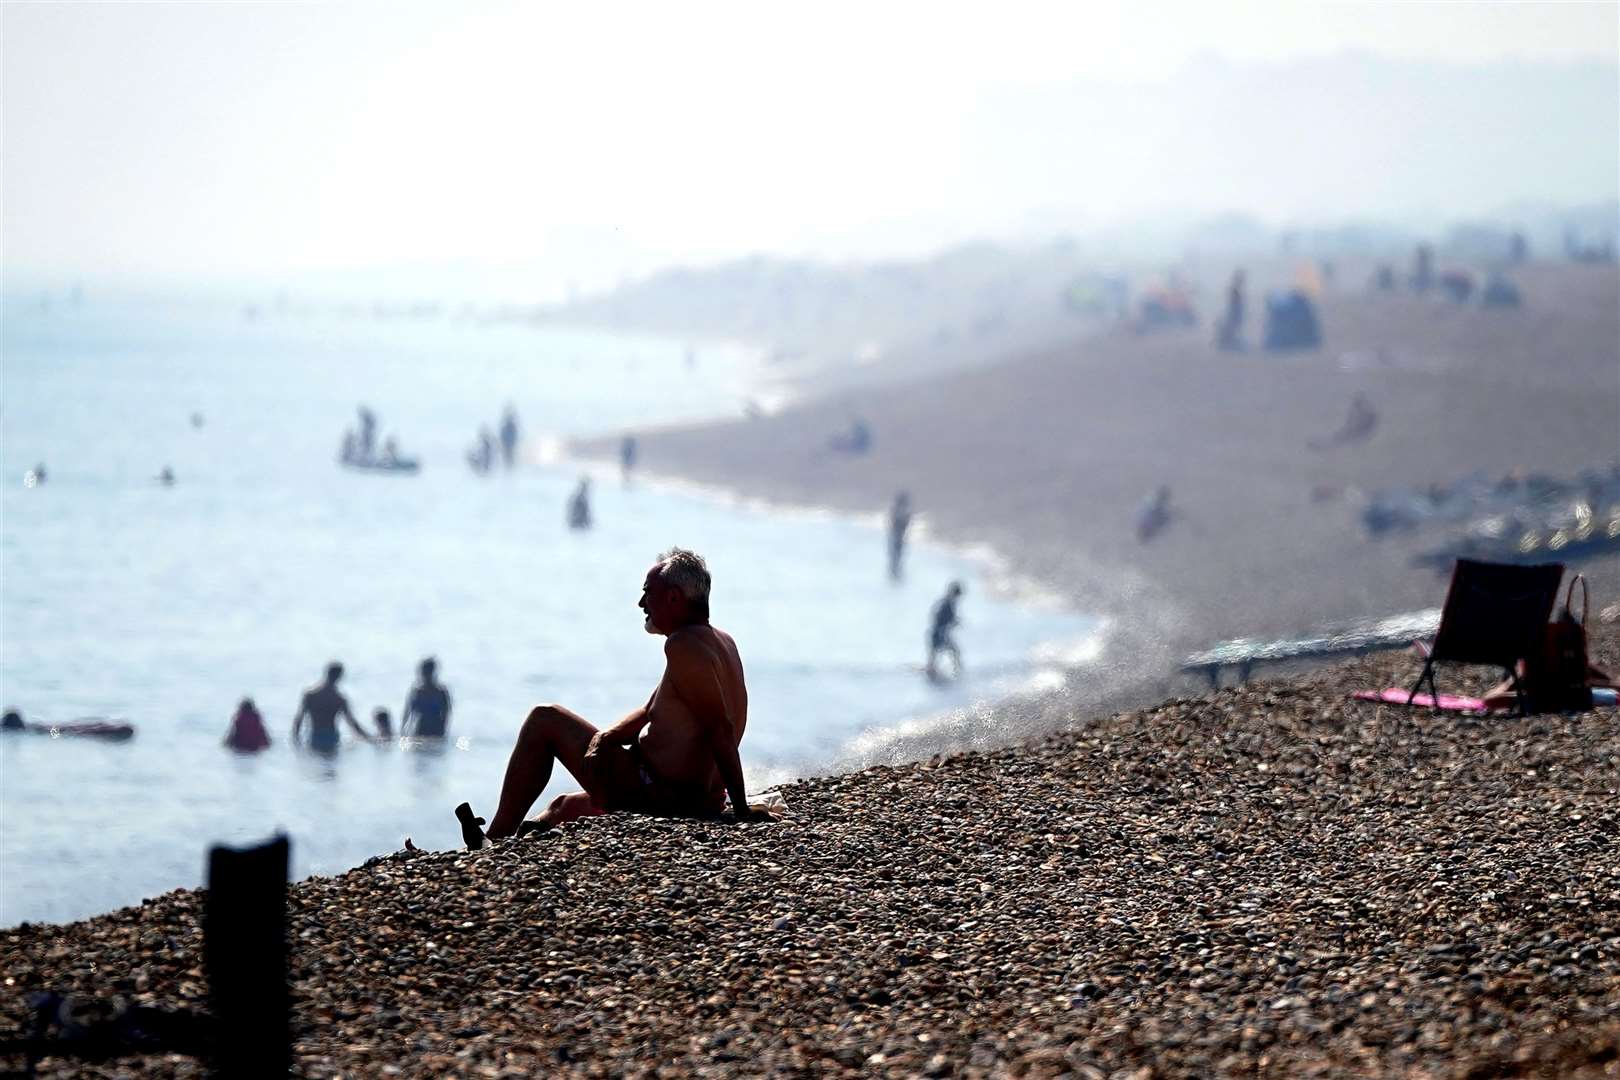 Last week’s heatwave broke the record for the most consecutive days with temperatures above 30C in September, with Saharan dust generating vivid sunsets and sunrises in the clear conditions (Victoria Jones/PA)